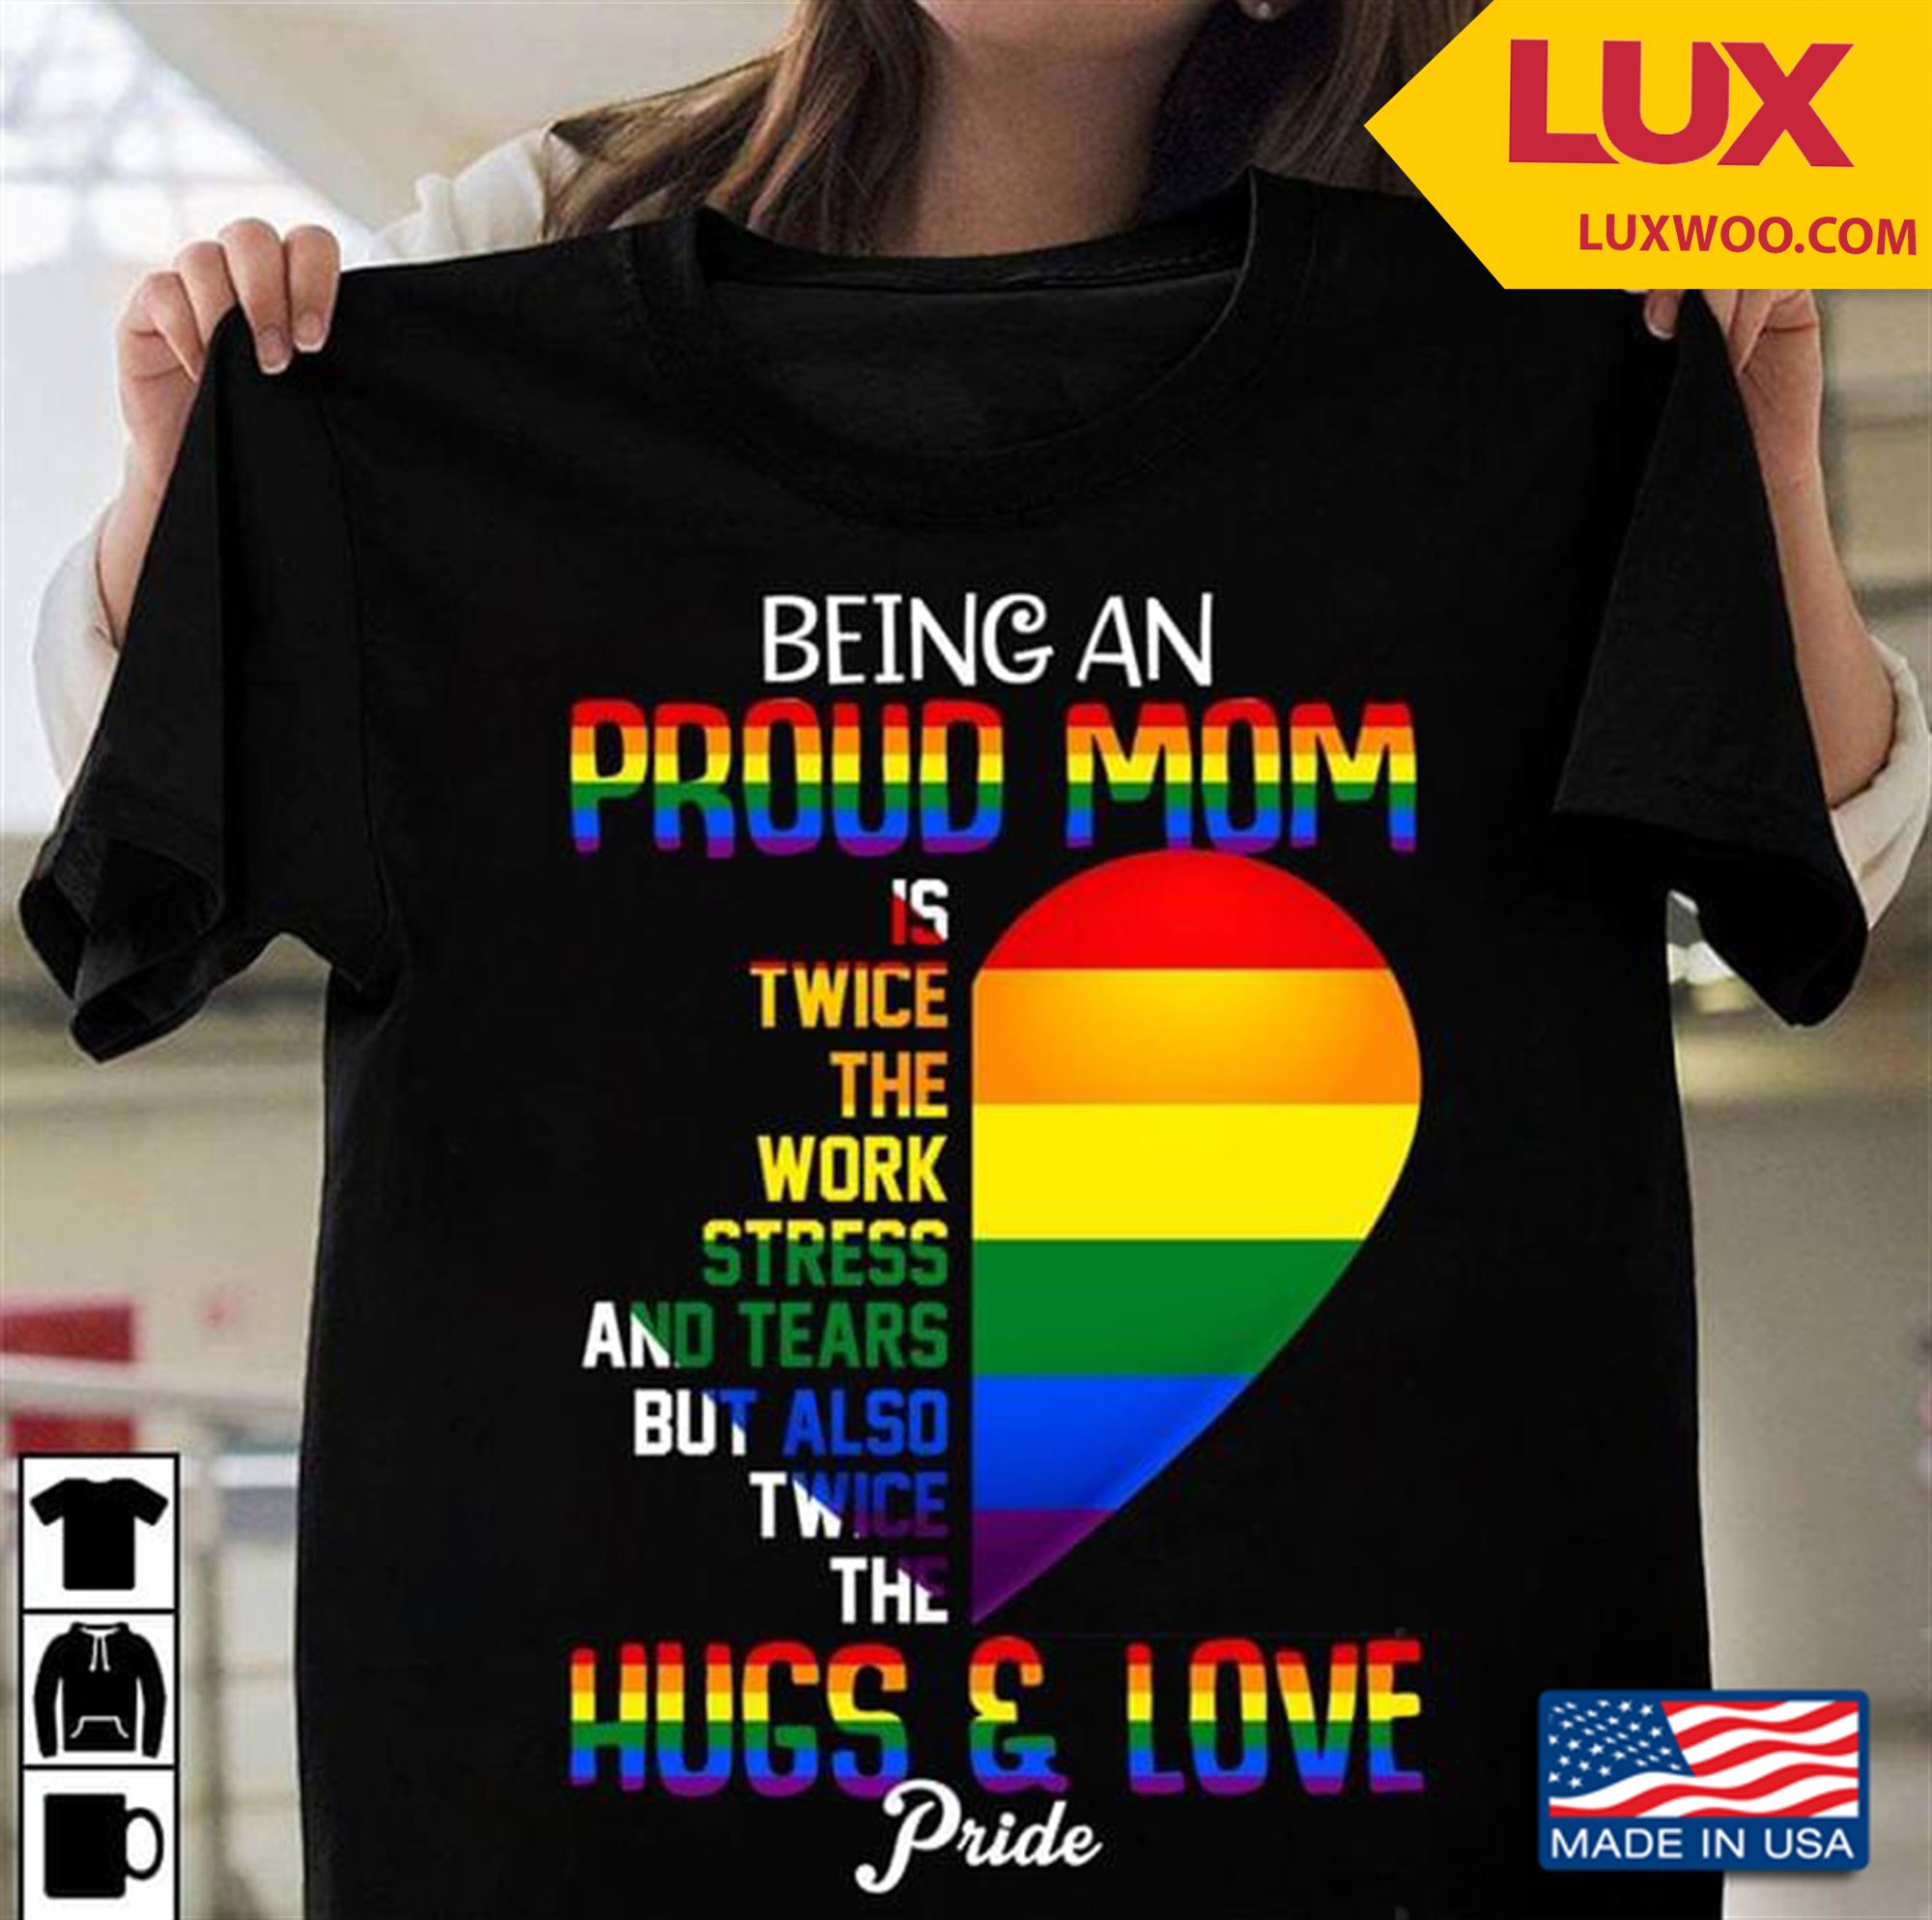 Lgbt Being An Proud Mom Is Twice The Work Stress And Tears But Also Twice The Hugs And Love Pride Shirt Size Up To 5xl